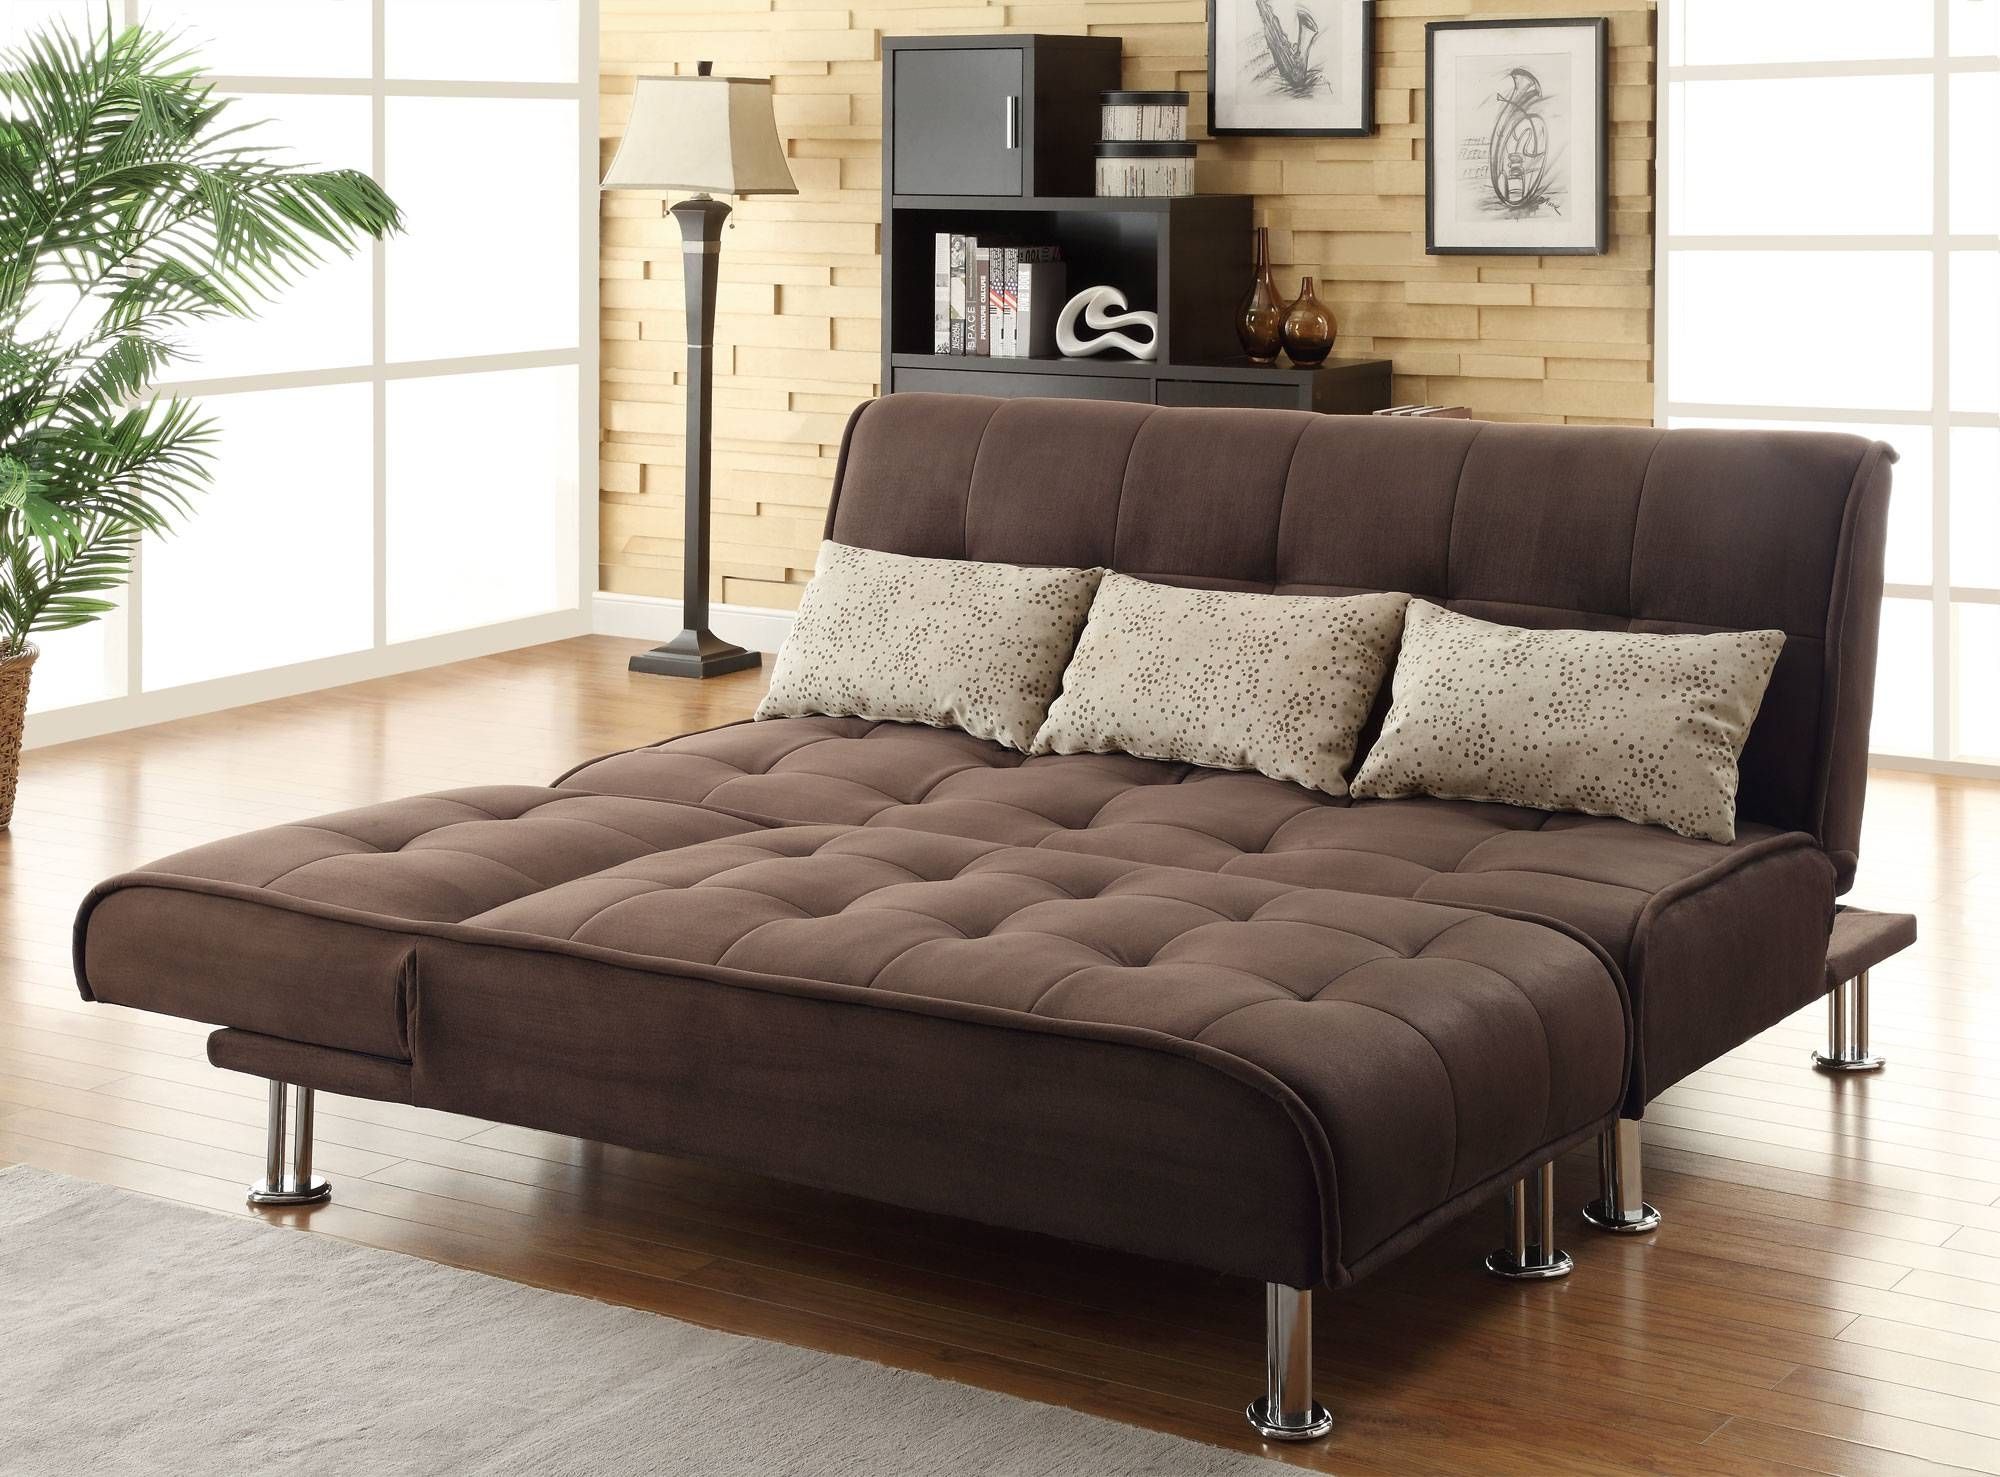 Furniture: Leather Futon Walmart With Modern Look And Stylish With Regard To Kmart Sleeper Sofas (View 10 of 15)